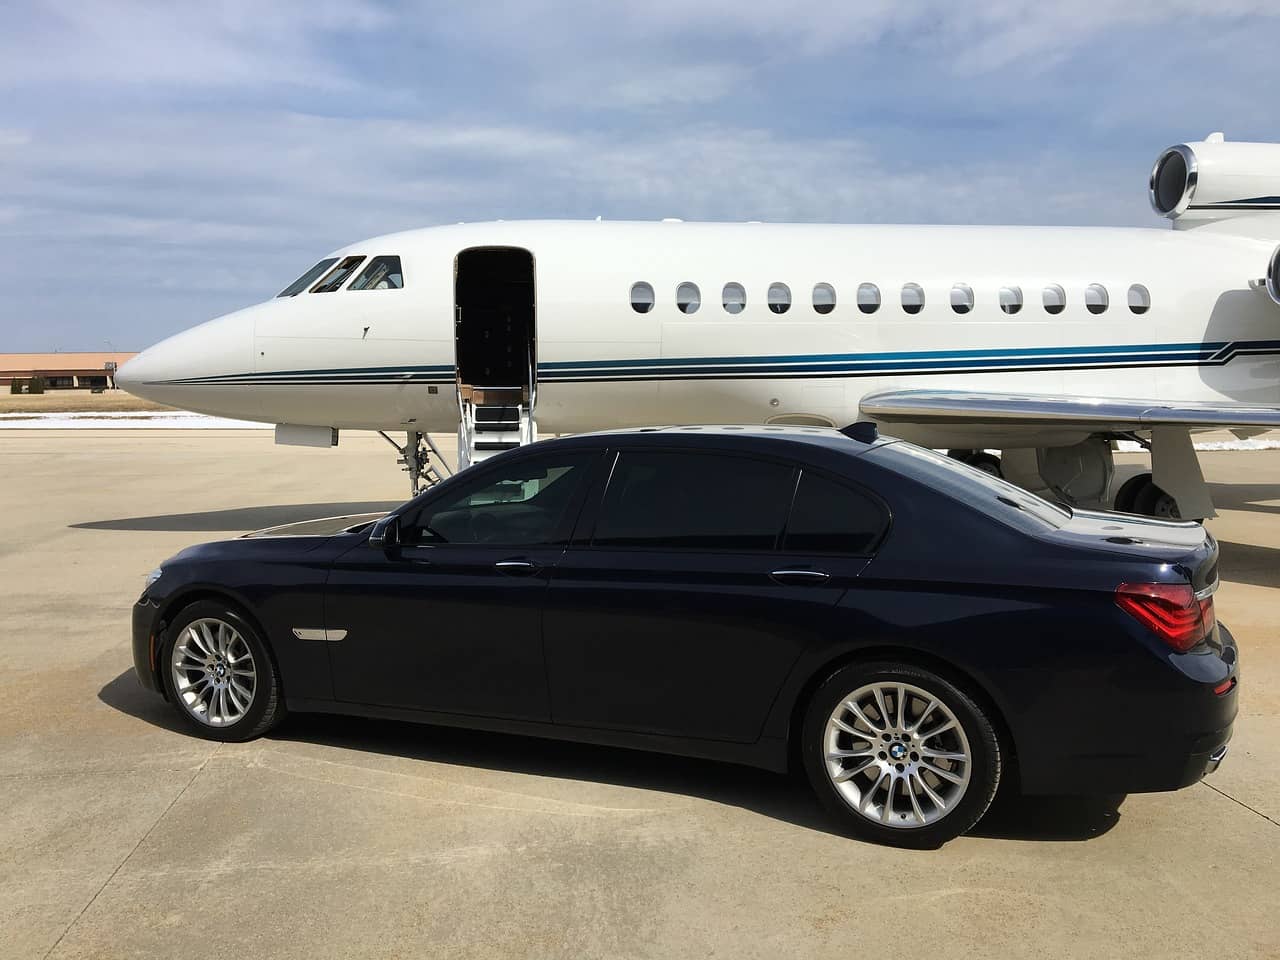 Supplemental Lift for Your Corporate Jet